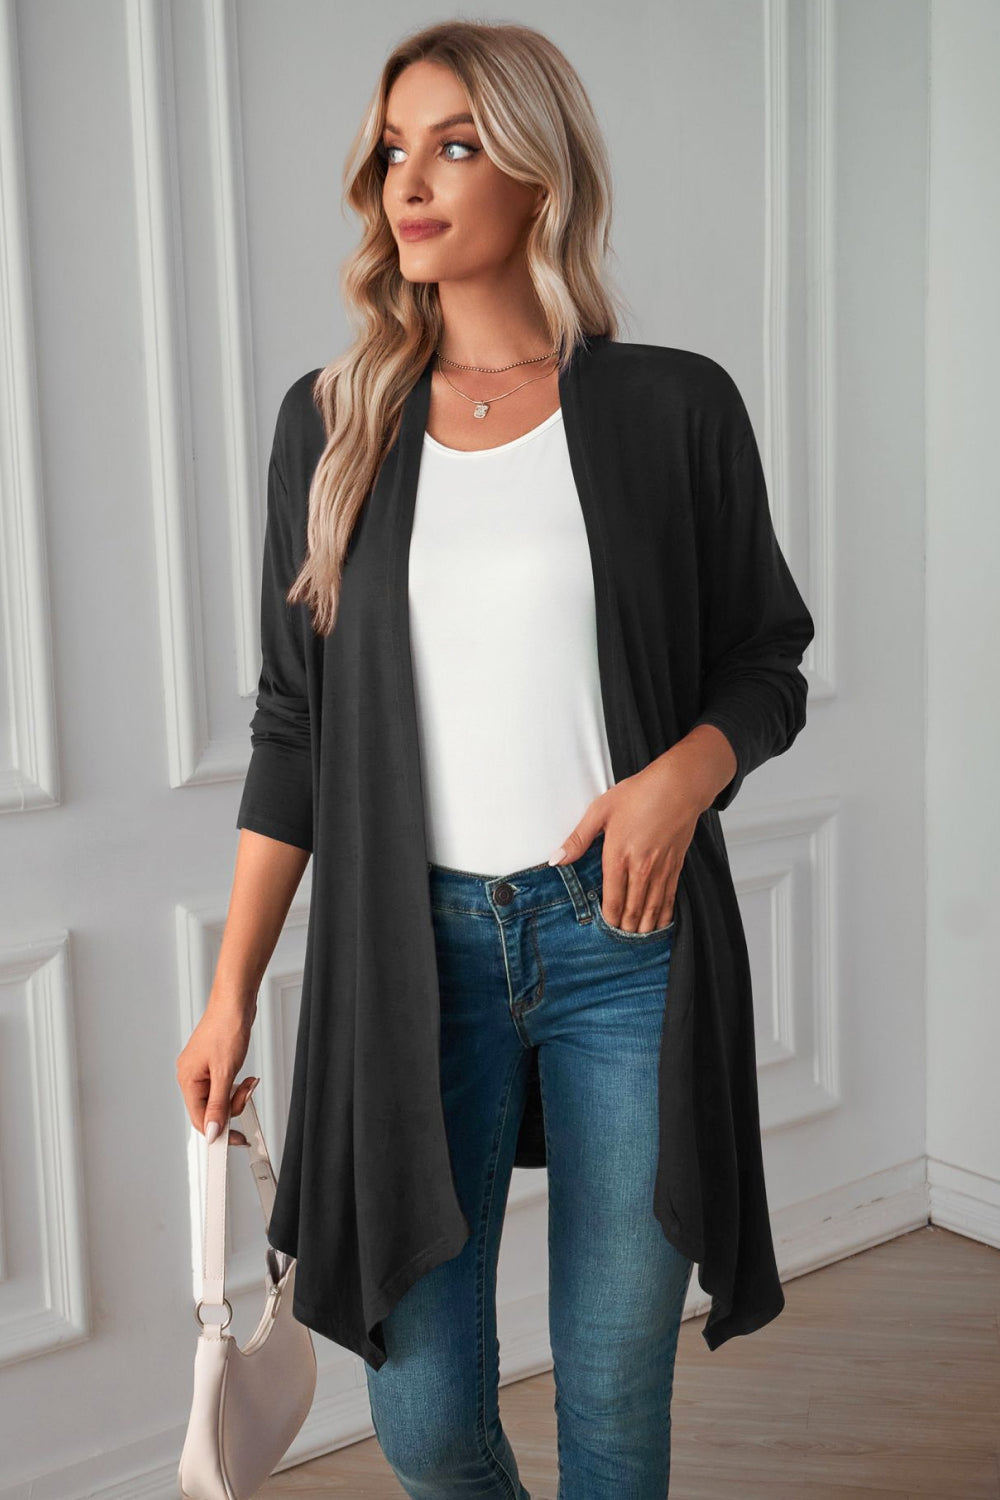 Open Front Long Sleeve Cardigan - Black / S - Women’s Clothing & Accessories - Shirts & Tops - 13 - 2024